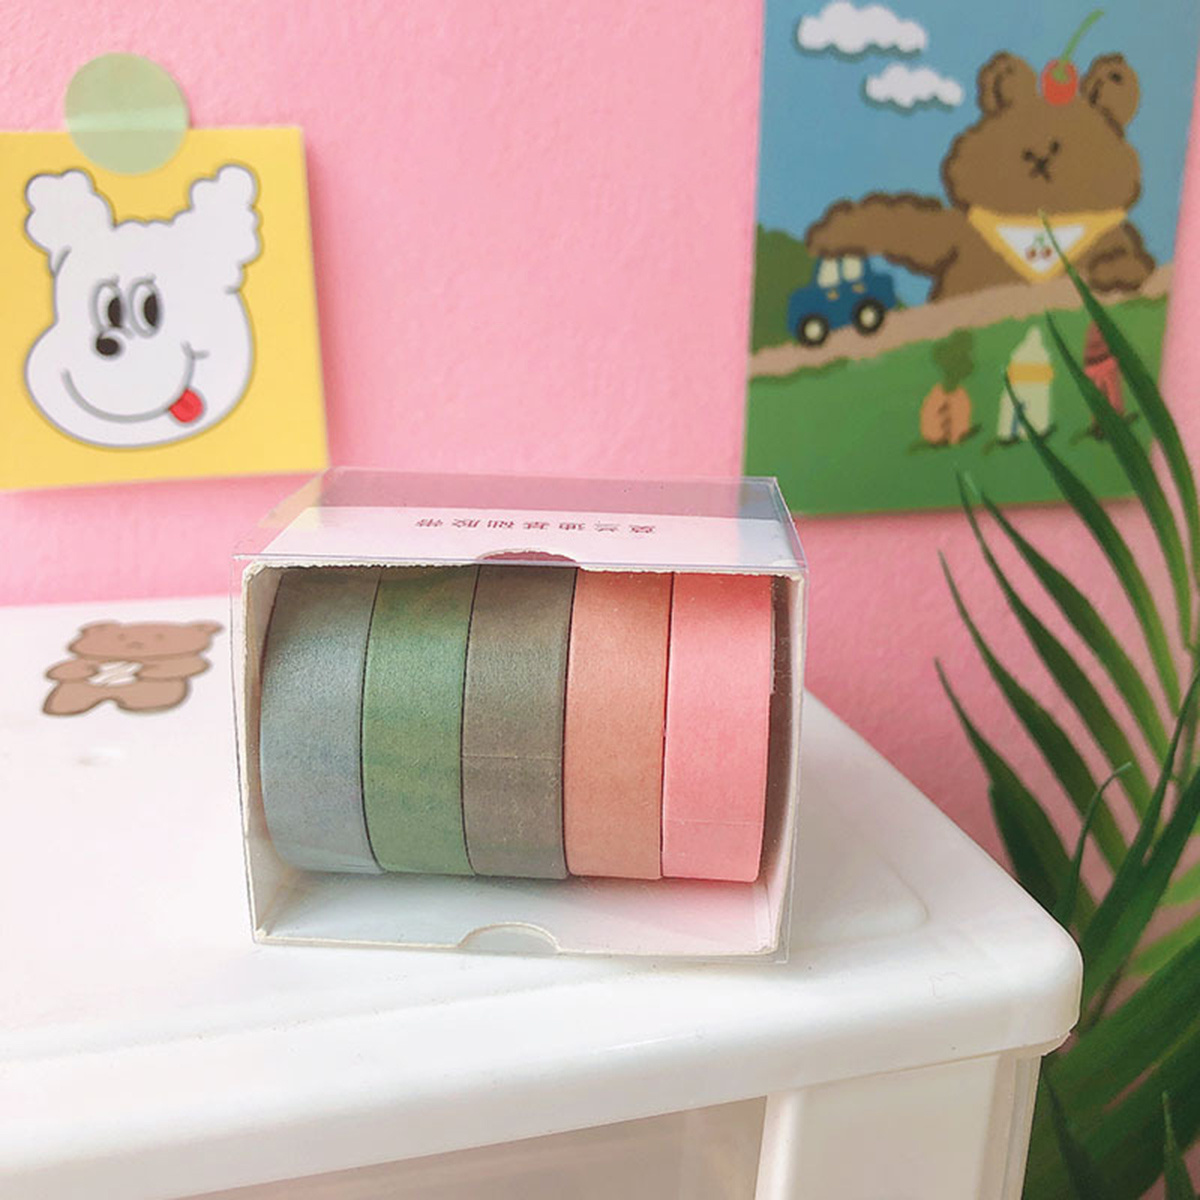 Washi Tape Crafts: Covered Heart Boxes